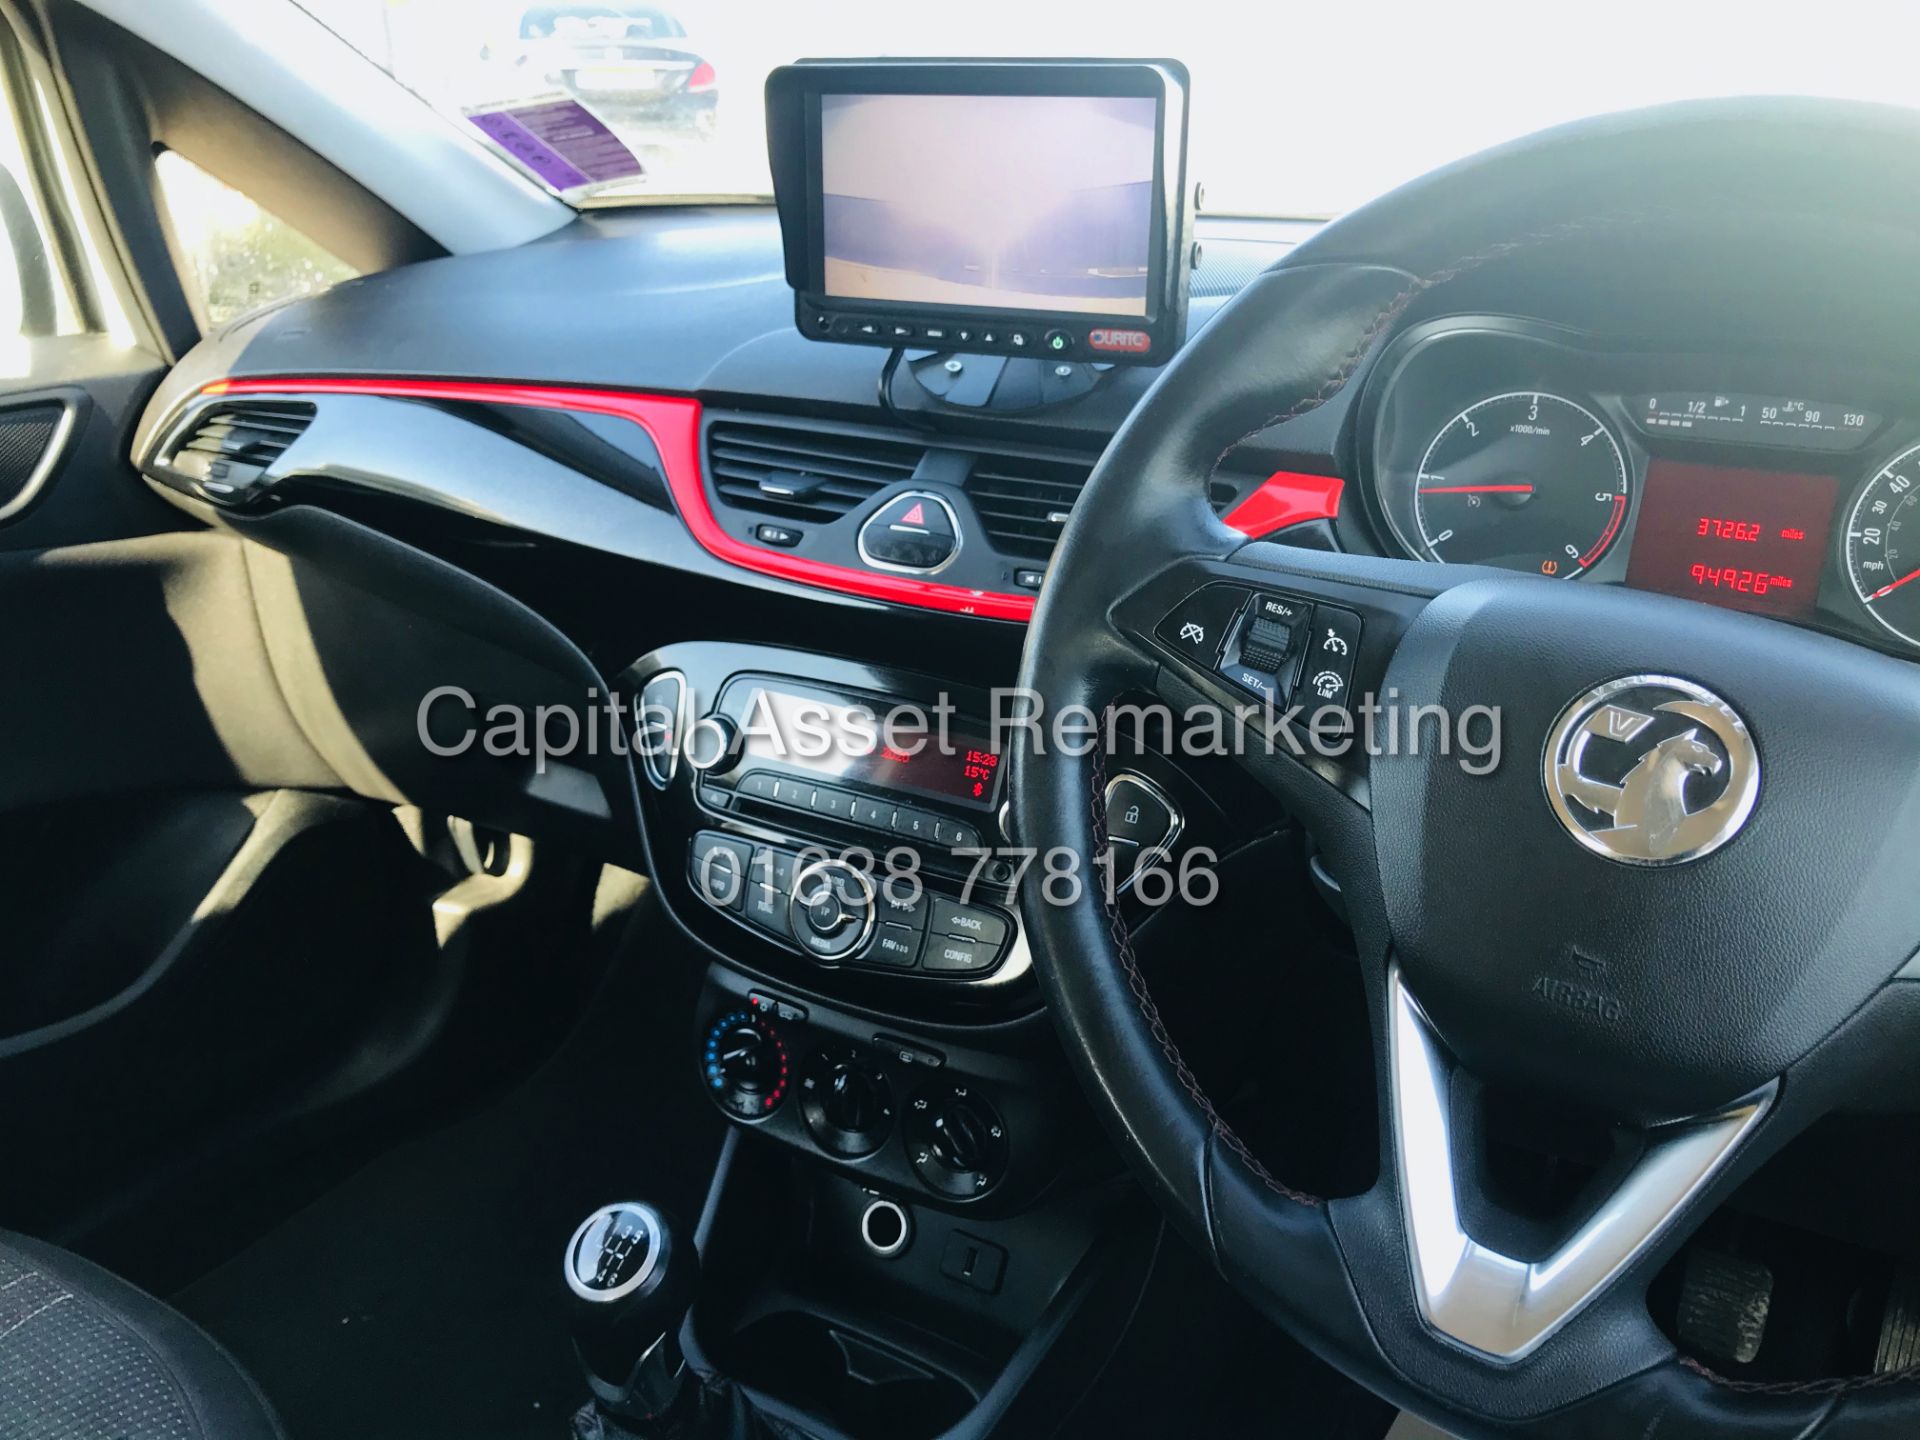 VAUXHALL CORSA 1.3CDTI "SPORTIVE" VAN (2017 MODEL) 1 OWNER FSH - LOW MILES - AIR CON -ALLOYS -EURO 6 - Image 30 of 33